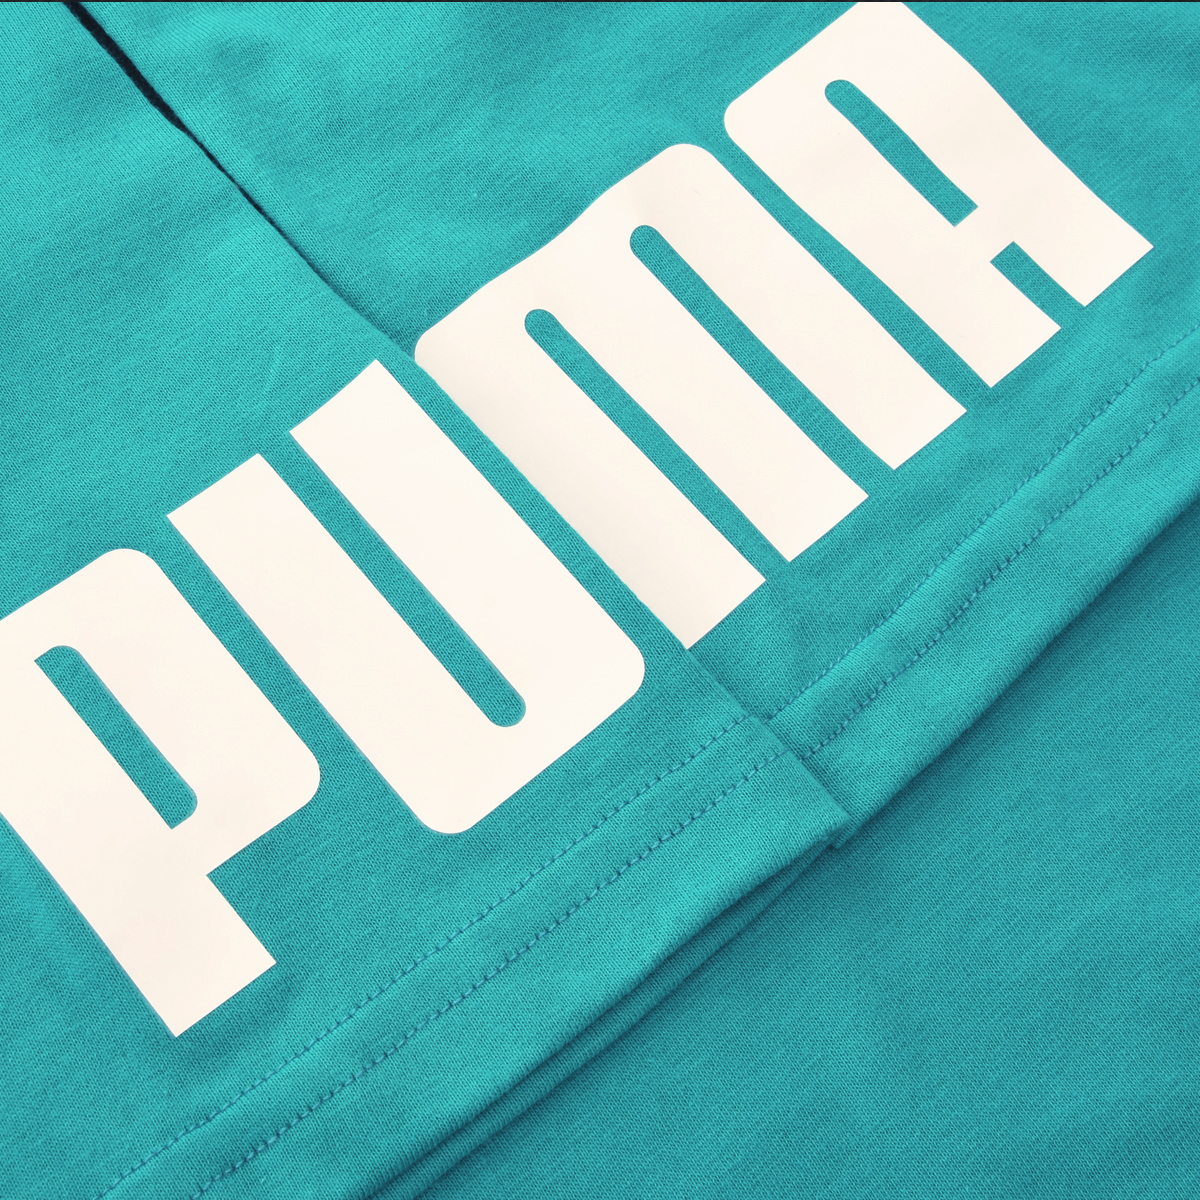 Remera Puma Power Colorblock Hombre,  image number null